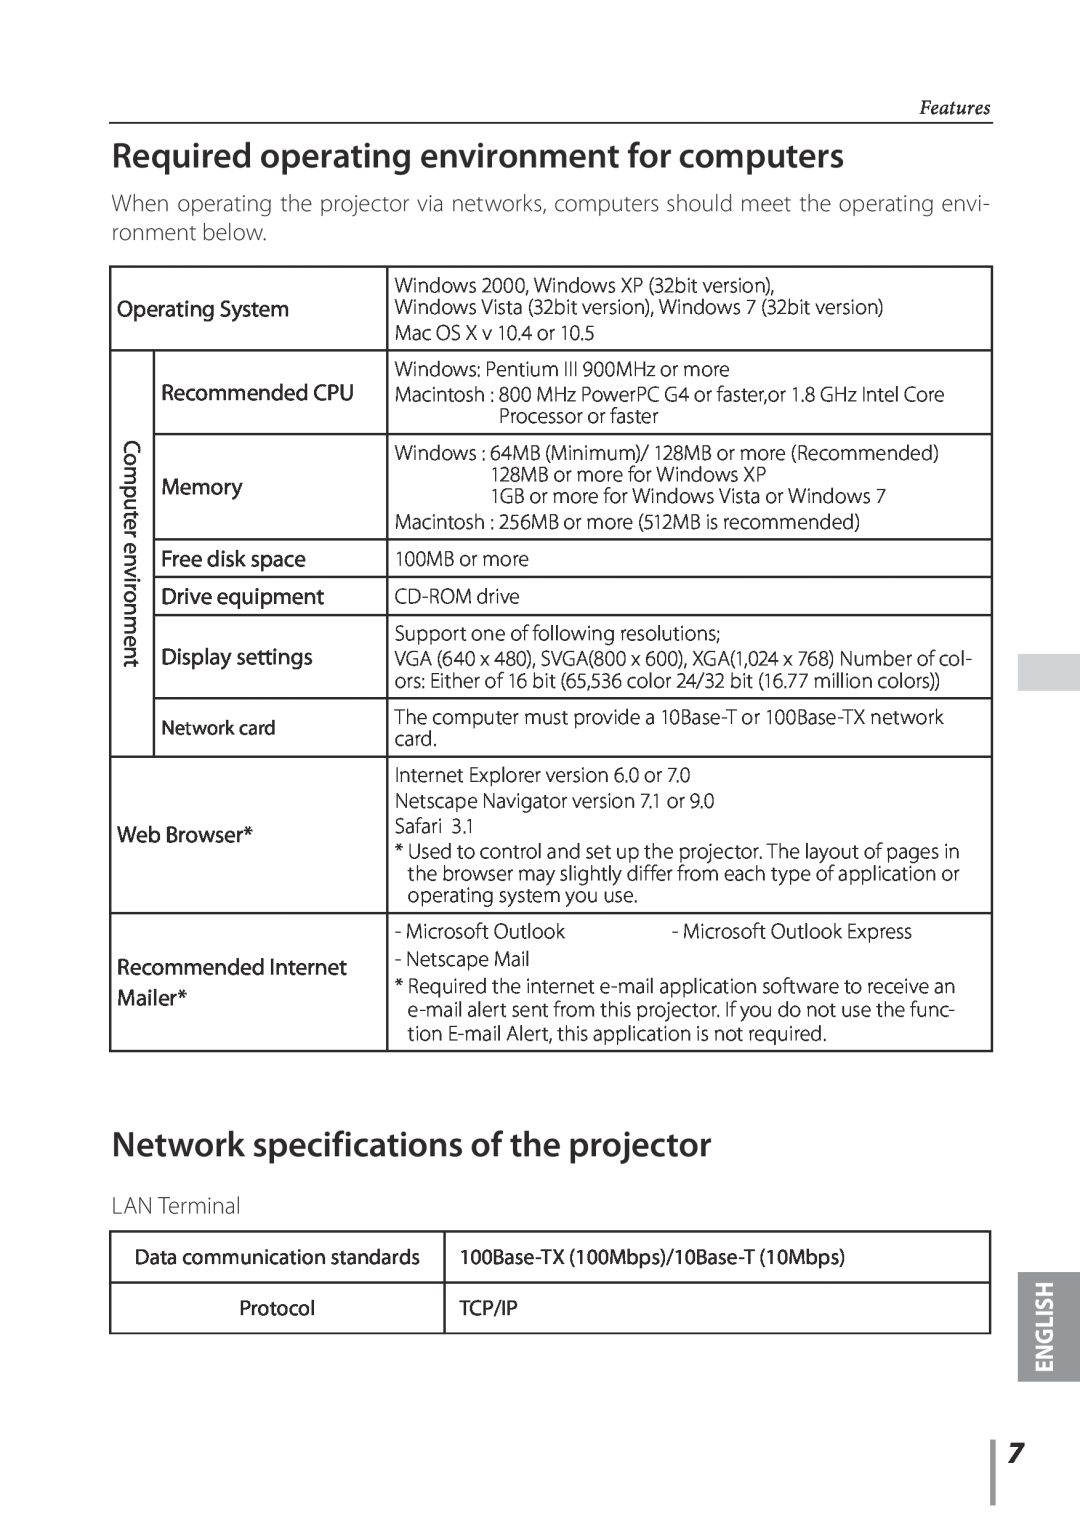 Sanyo Proj05 Required operating environment for computers, Network specifications of the projector, Operating System 